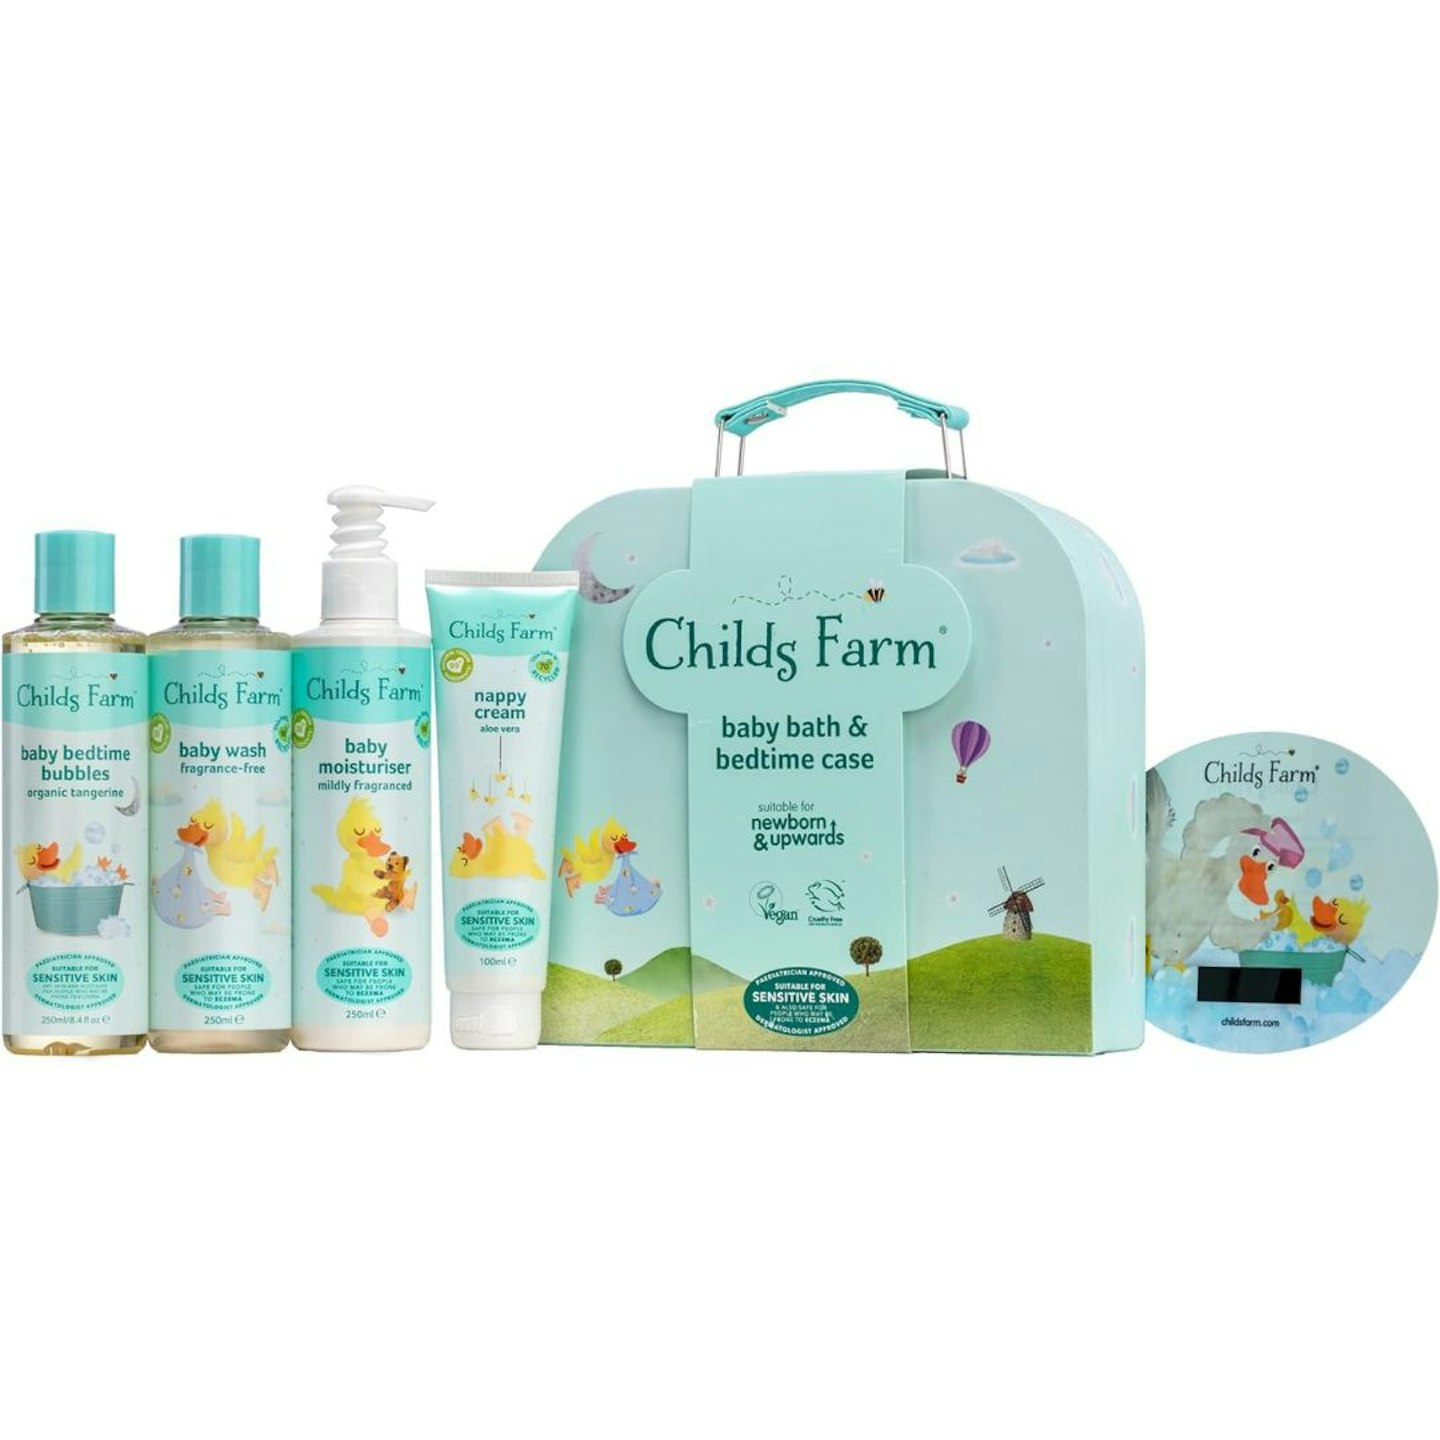  Best Christmas Gifts For Kids: Childs Farm Baby Gifting Suitcase